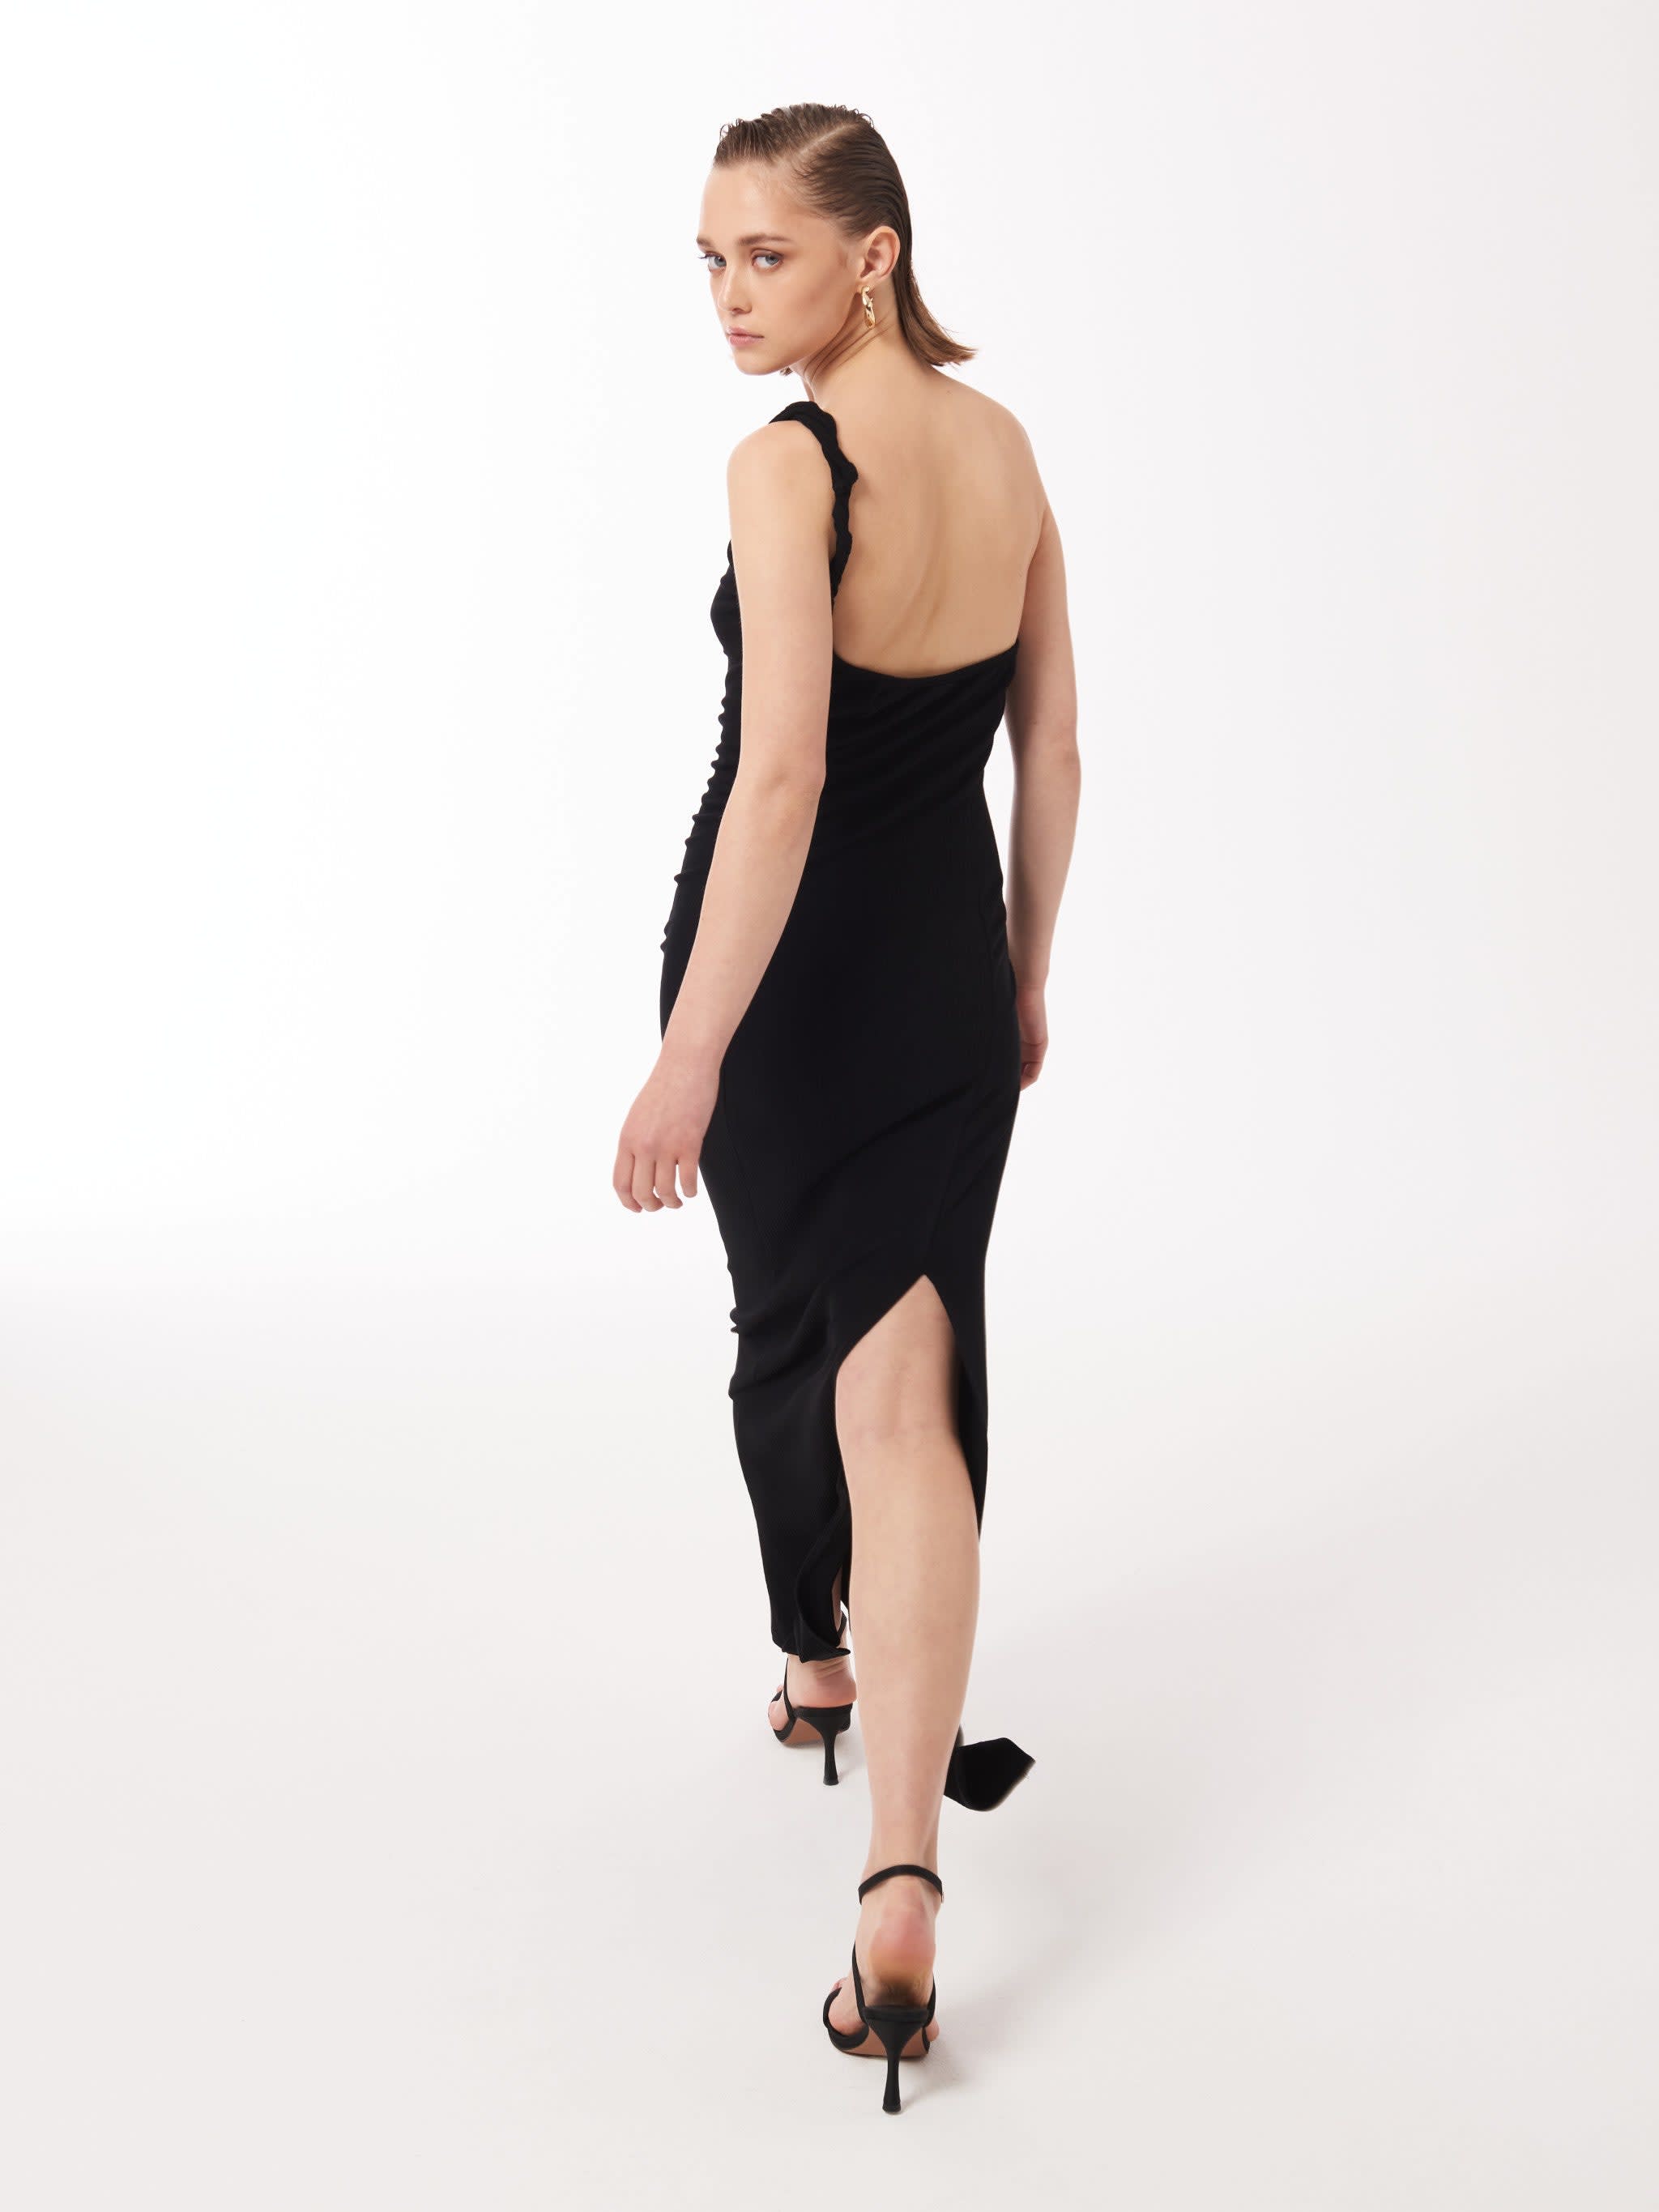 Dress Single Twisted Maxi | Wolf Black Strap Shoulder SOUR FIGS | Two-Way & In Badger